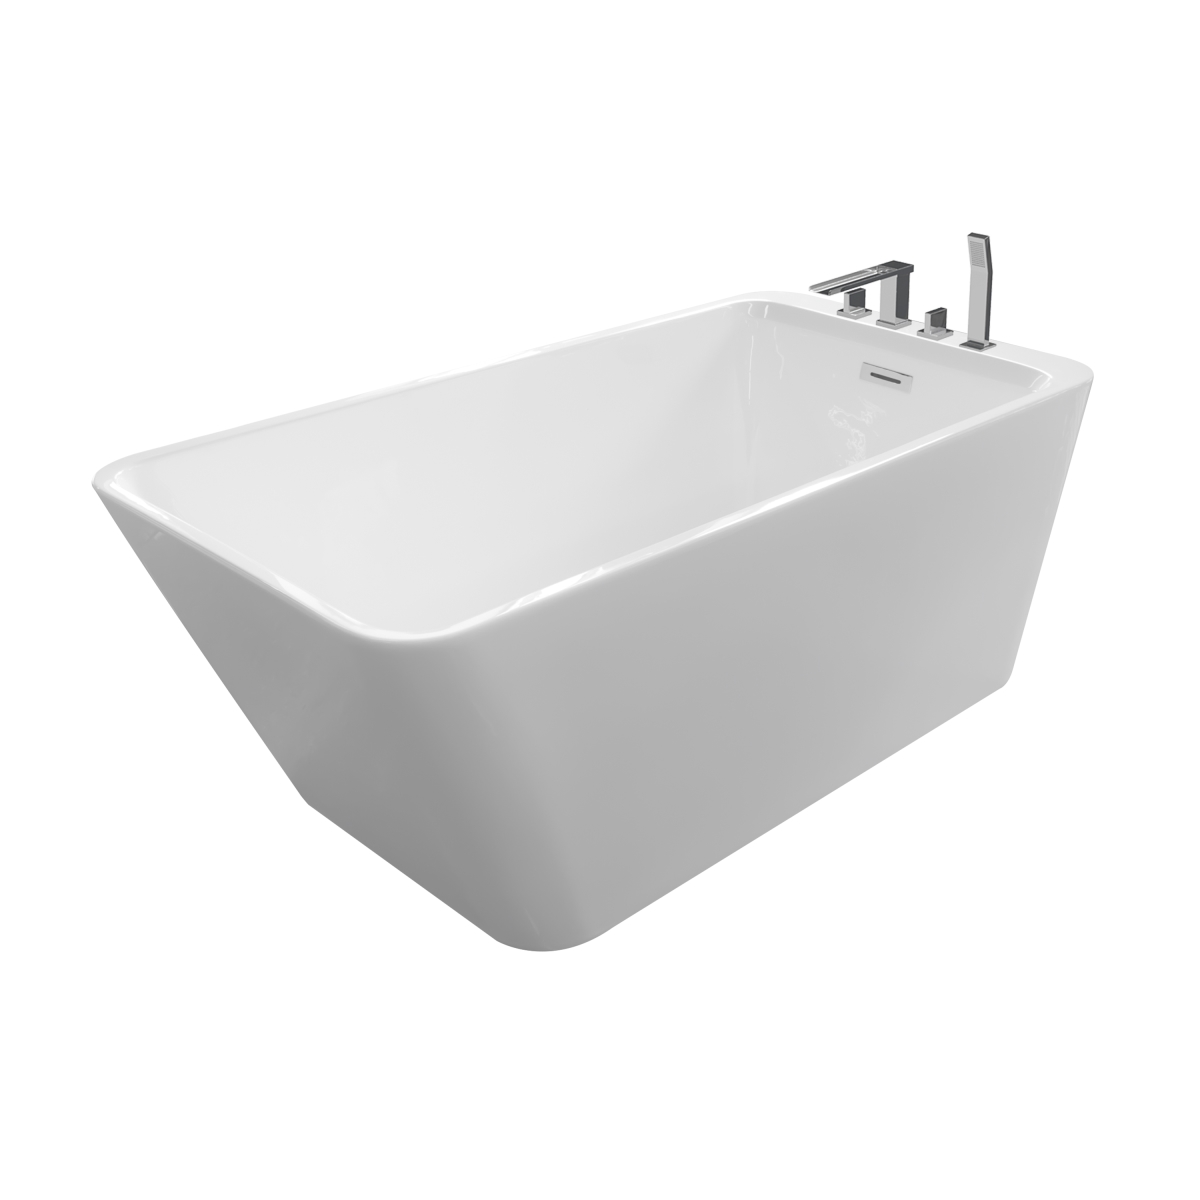 Justinian 59 Contemporary Rectangular Freestanding Acrylic Insulated Bath Tub With Faucet Deck, White - 59 X 29 X 23 In.